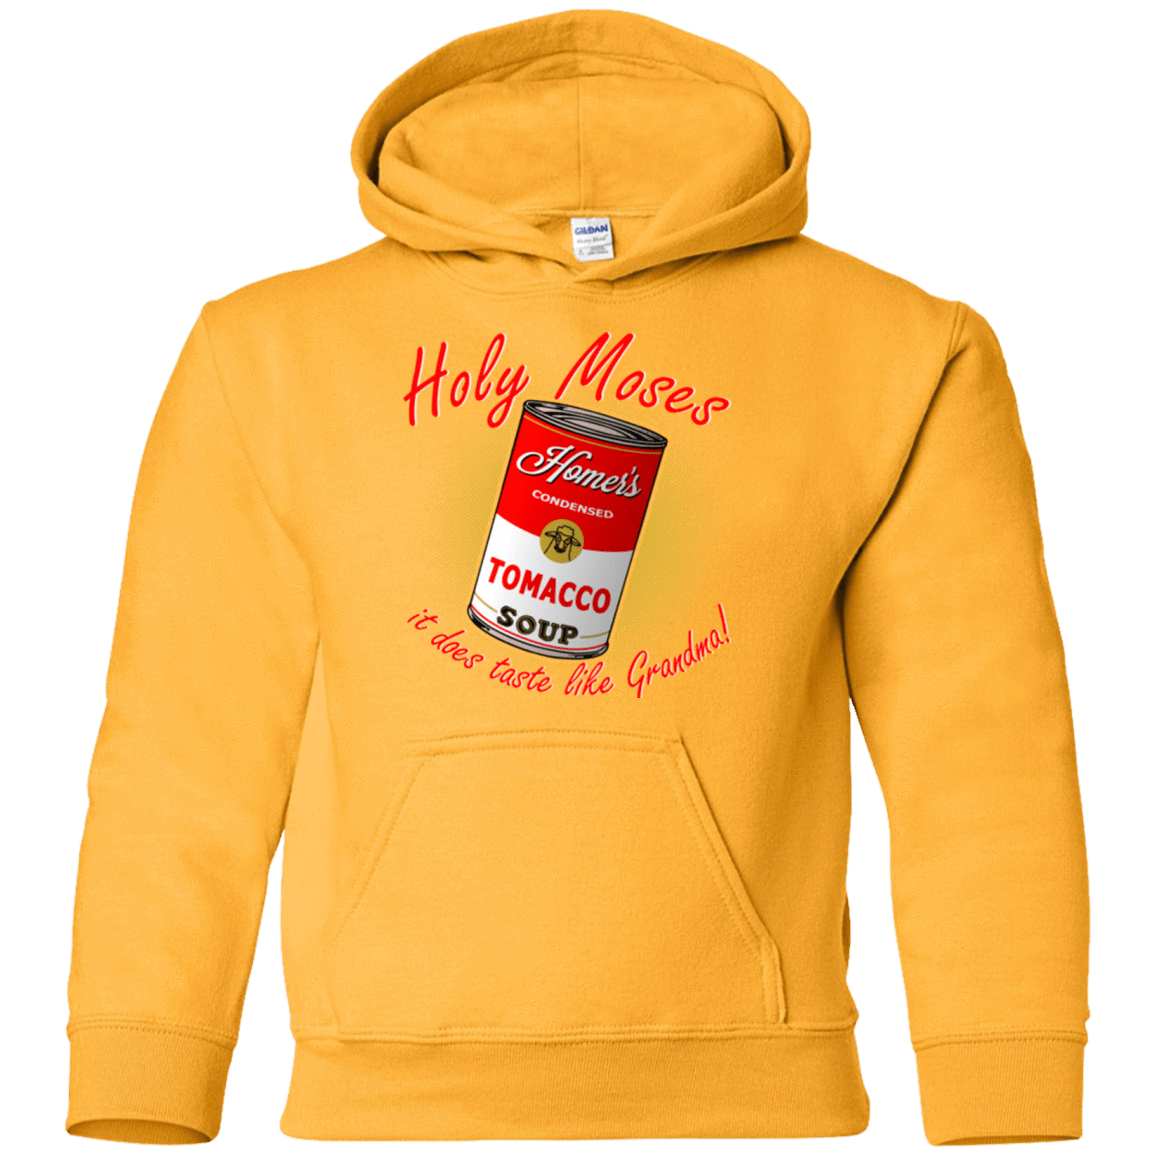 Sweatshirts Gold / YS Holy moses Youth Hoodie